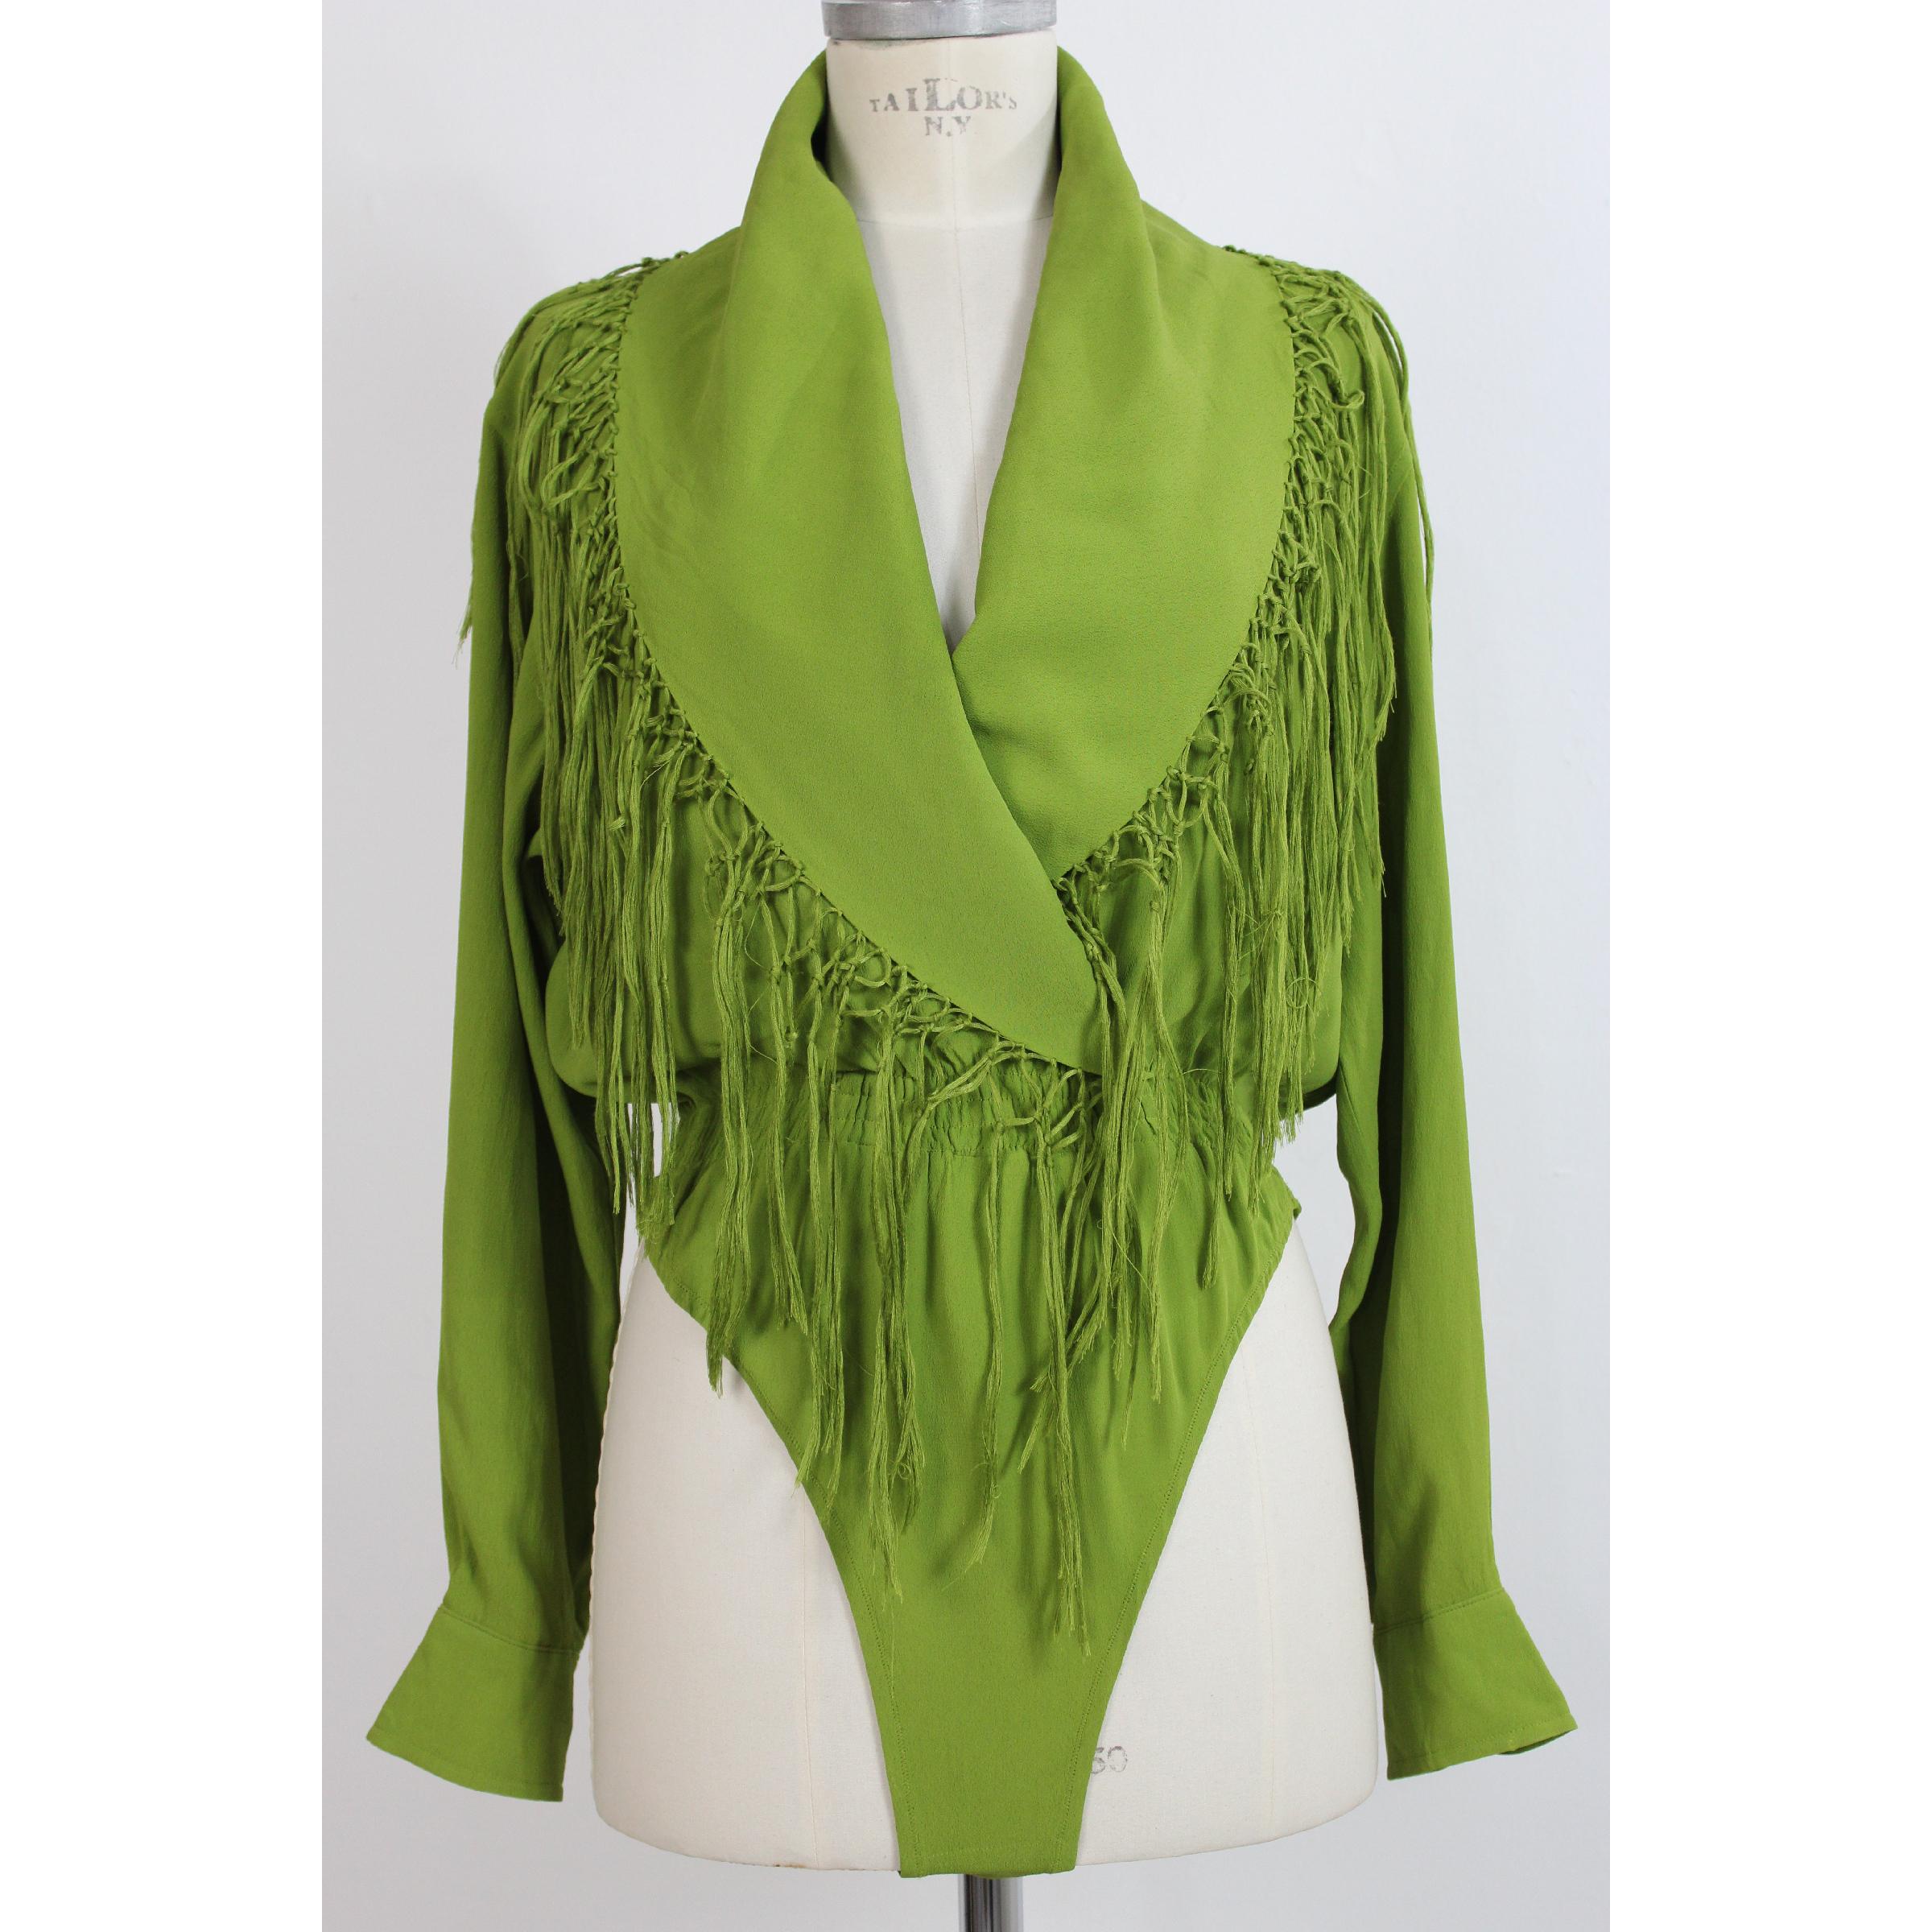 Jean Paul Gaultier vintage shirt for women, green, silk texture. Body model, fringe along the wide neck, band with elastic waist. 90s. Made in Italy. Excellent vintage conditions.

Size: 46 It 12 Us 14 Uk

Shoulder: 46 cm

Bust / Chest: 54